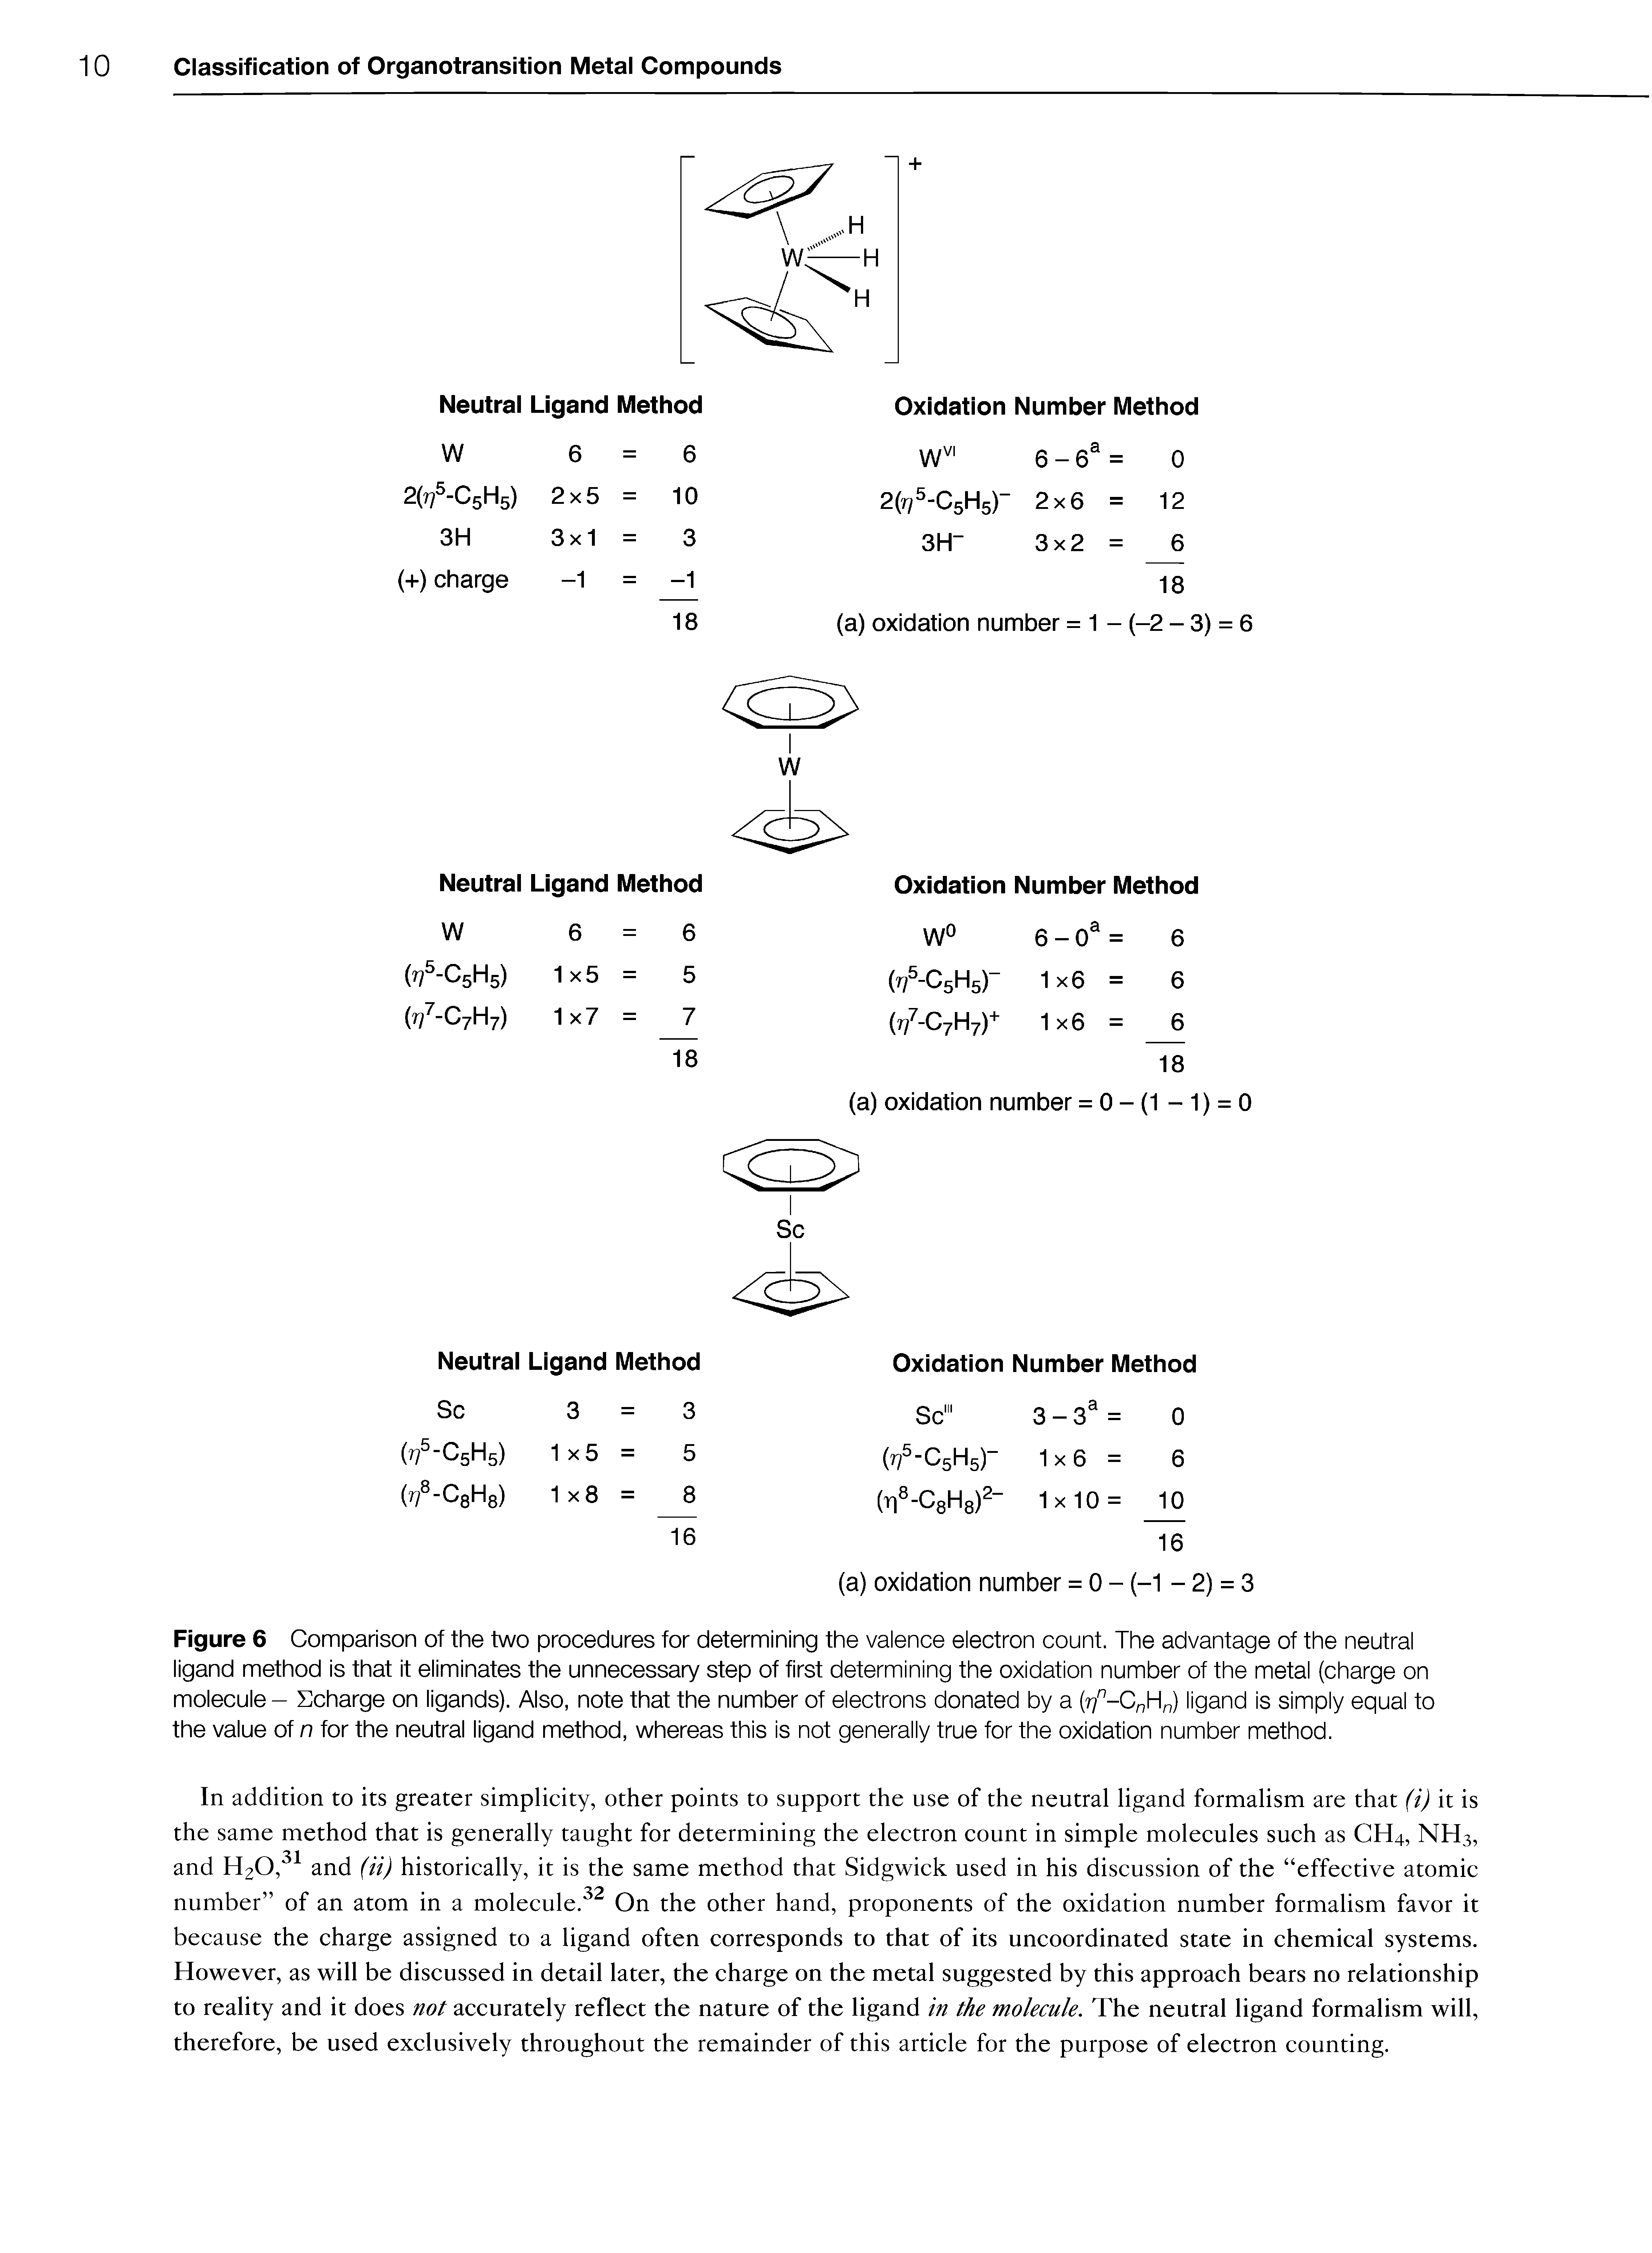 Figure 6 Comparison of the two procedures for determining the valence electron count. The advantage of the neutral ligand method is that it eliminates the unnecessary step of first determining the oxidation number of the metal (charge on molecule - Scharge on ligands). Also, note that the number of electrons donated by a ligand is simply equal to...